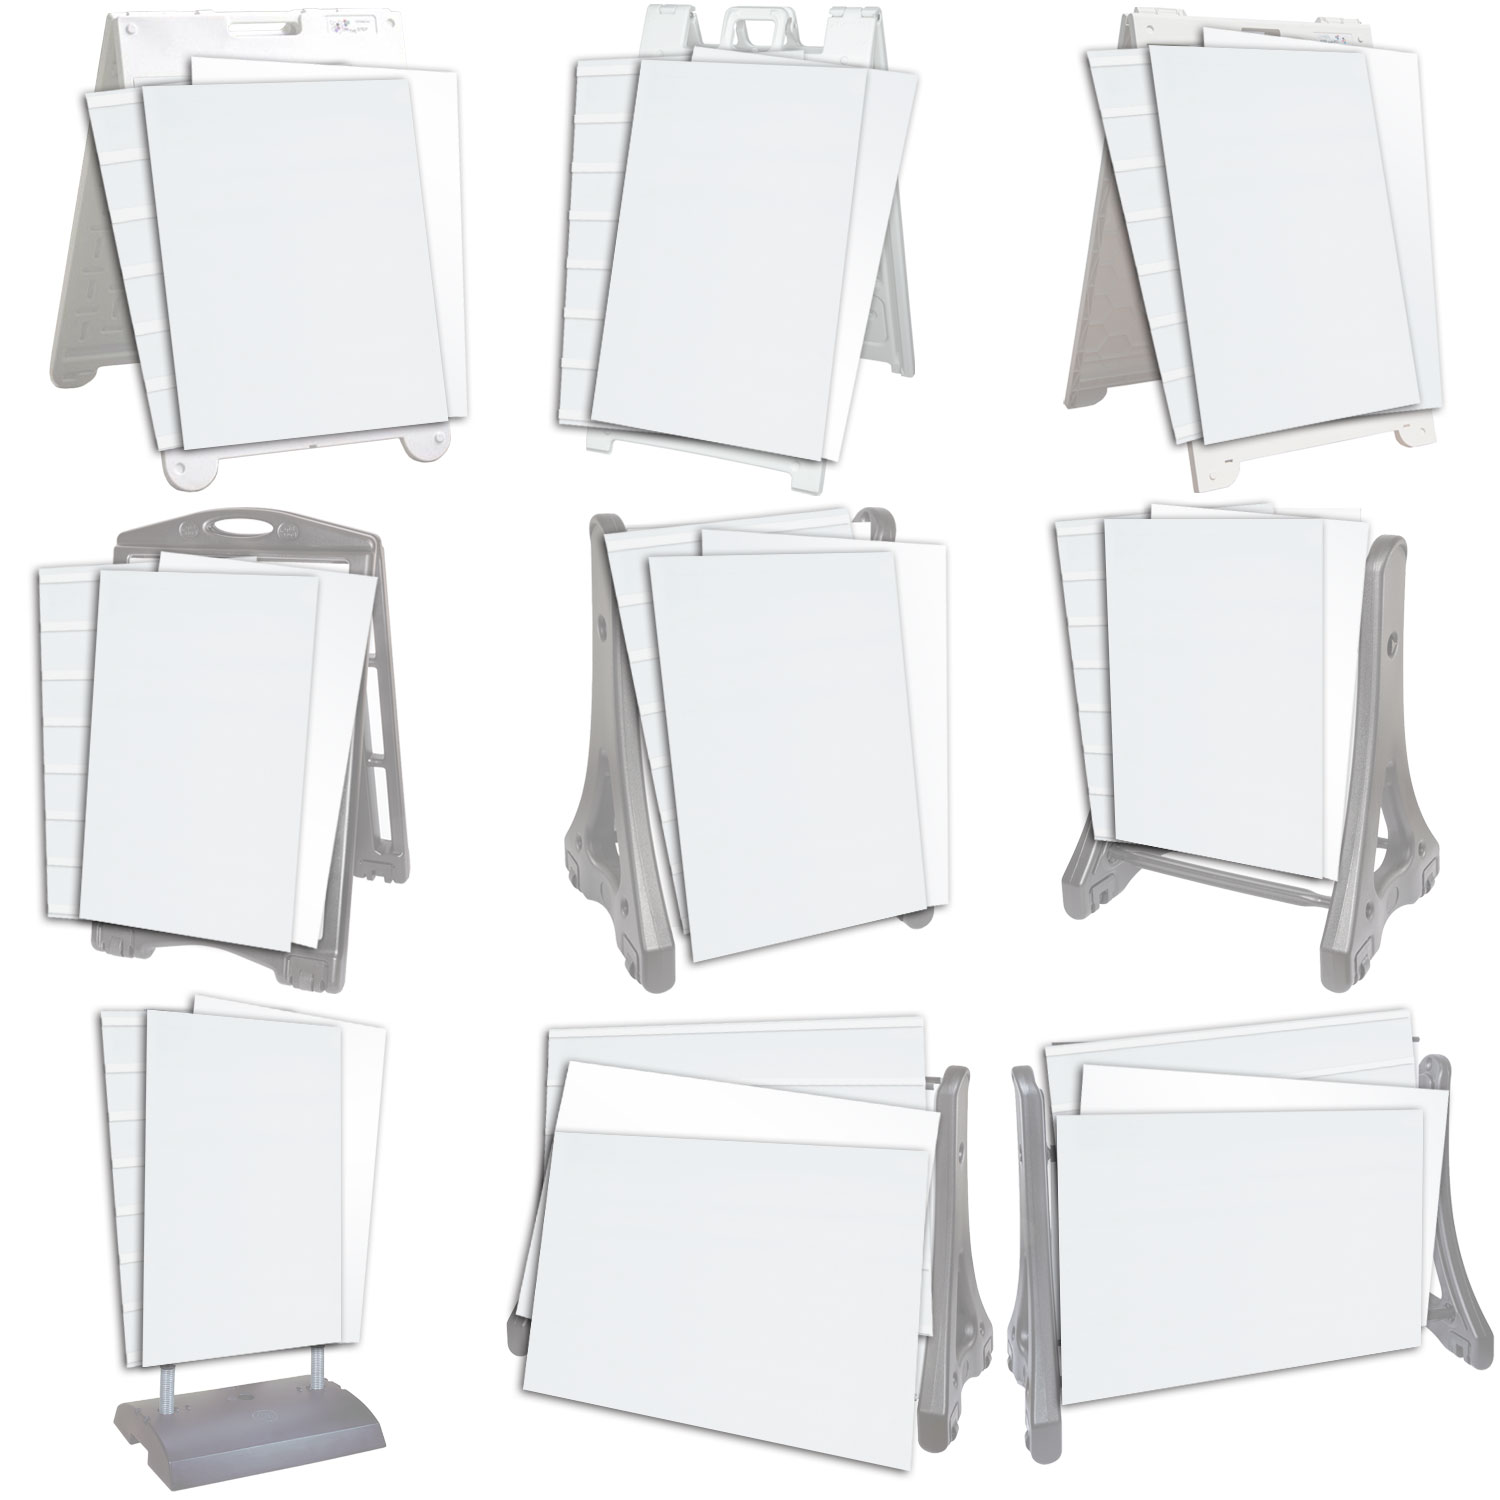 An image that shows the available types of replacement sign faces for sidewalk and outdoor sign frames.